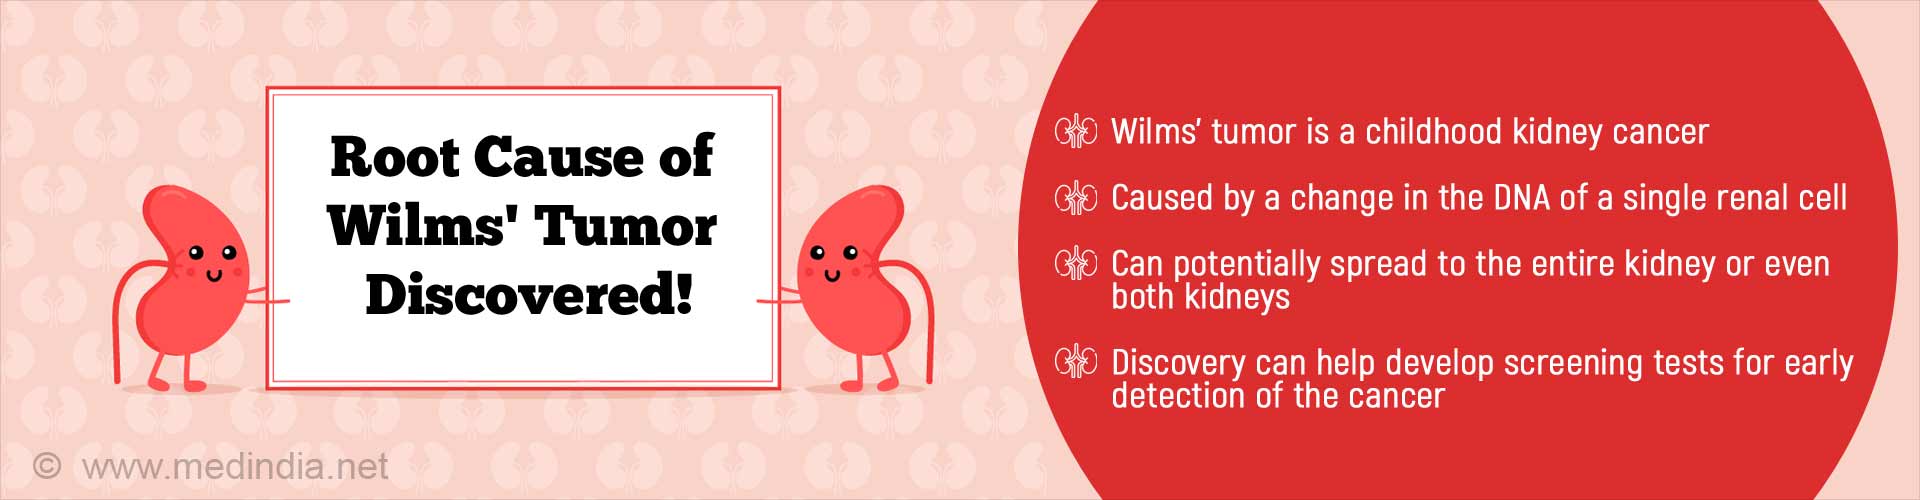 Root cause of Wilms' tumor discovered! Wilms' tumor is a childhood kidney cancer. Caused by a change in the DNA of a single renal cell. Can potentially spread to the entire kidney or even both kidneys. Discovery can help develop screening tests for early detection of the cancer.